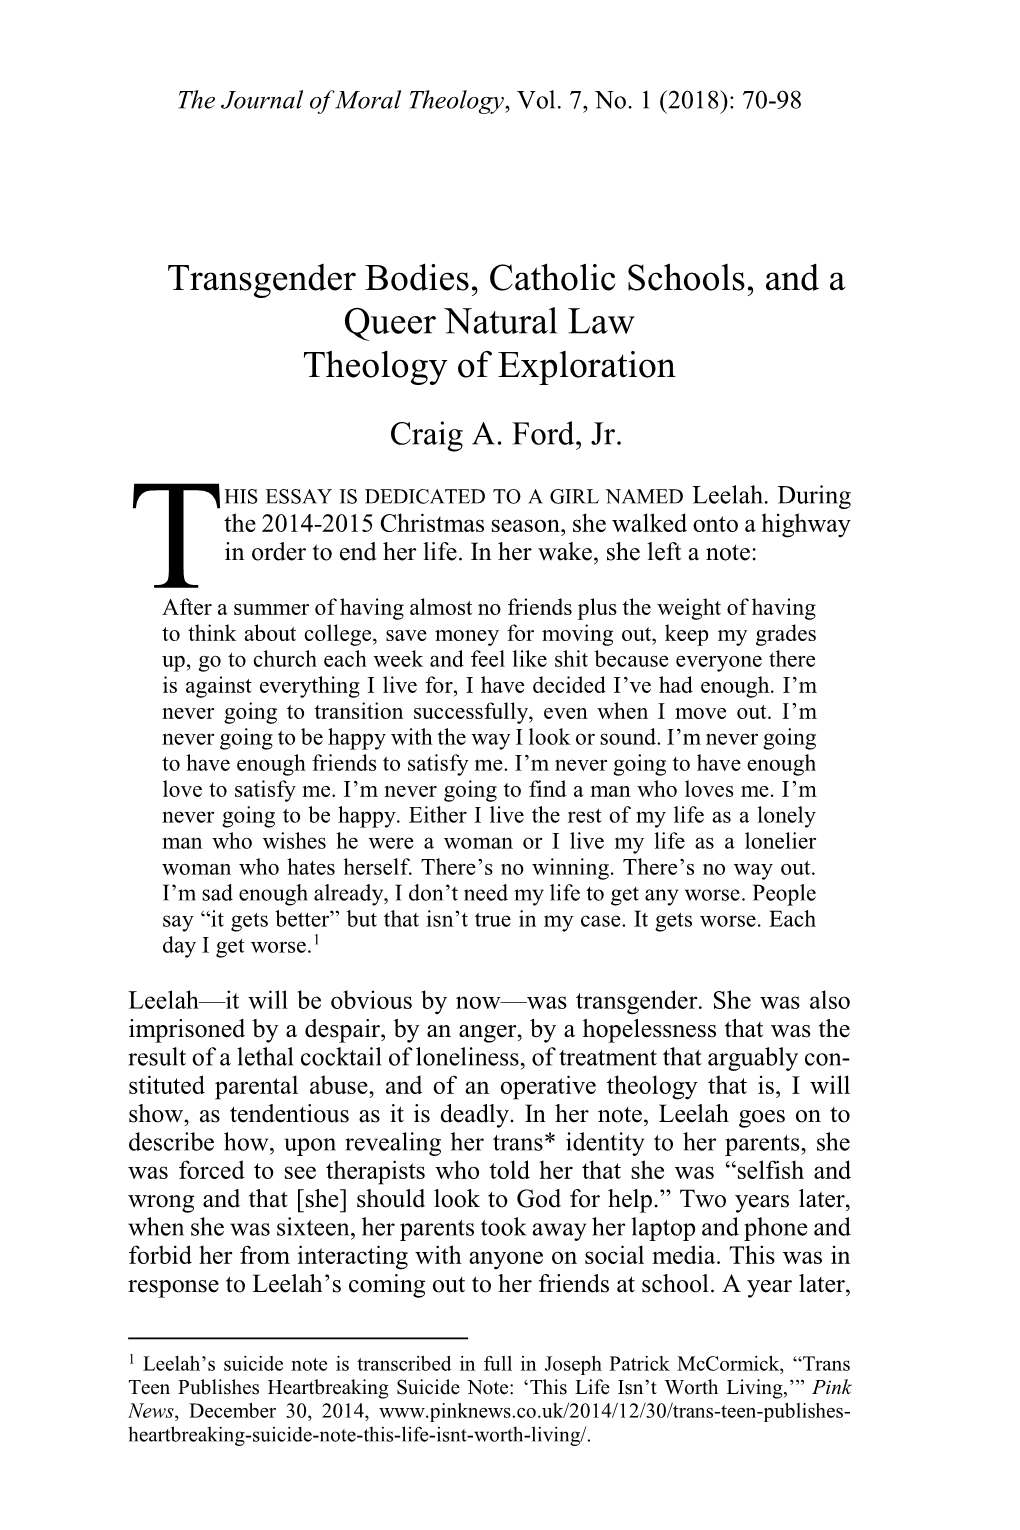 Transgender Bodies, Catholic Schools, and a Queer Natural Law Theology of Exploration